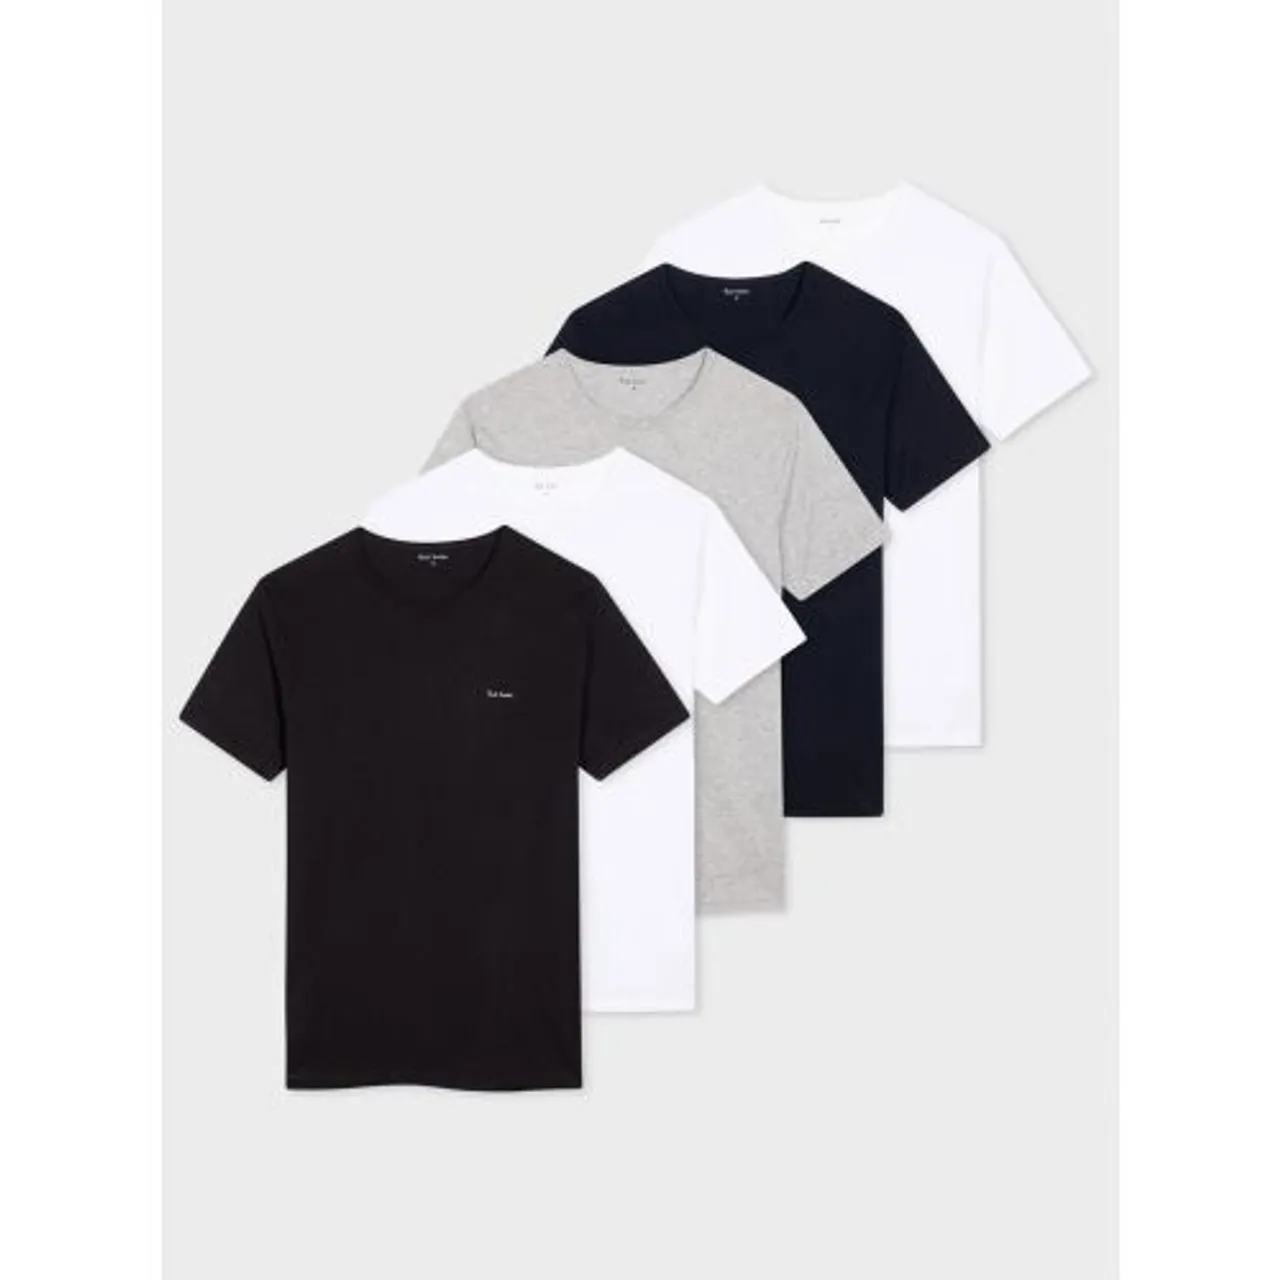 Paul Smith Mens Assorted 5-Pack T-Shirt